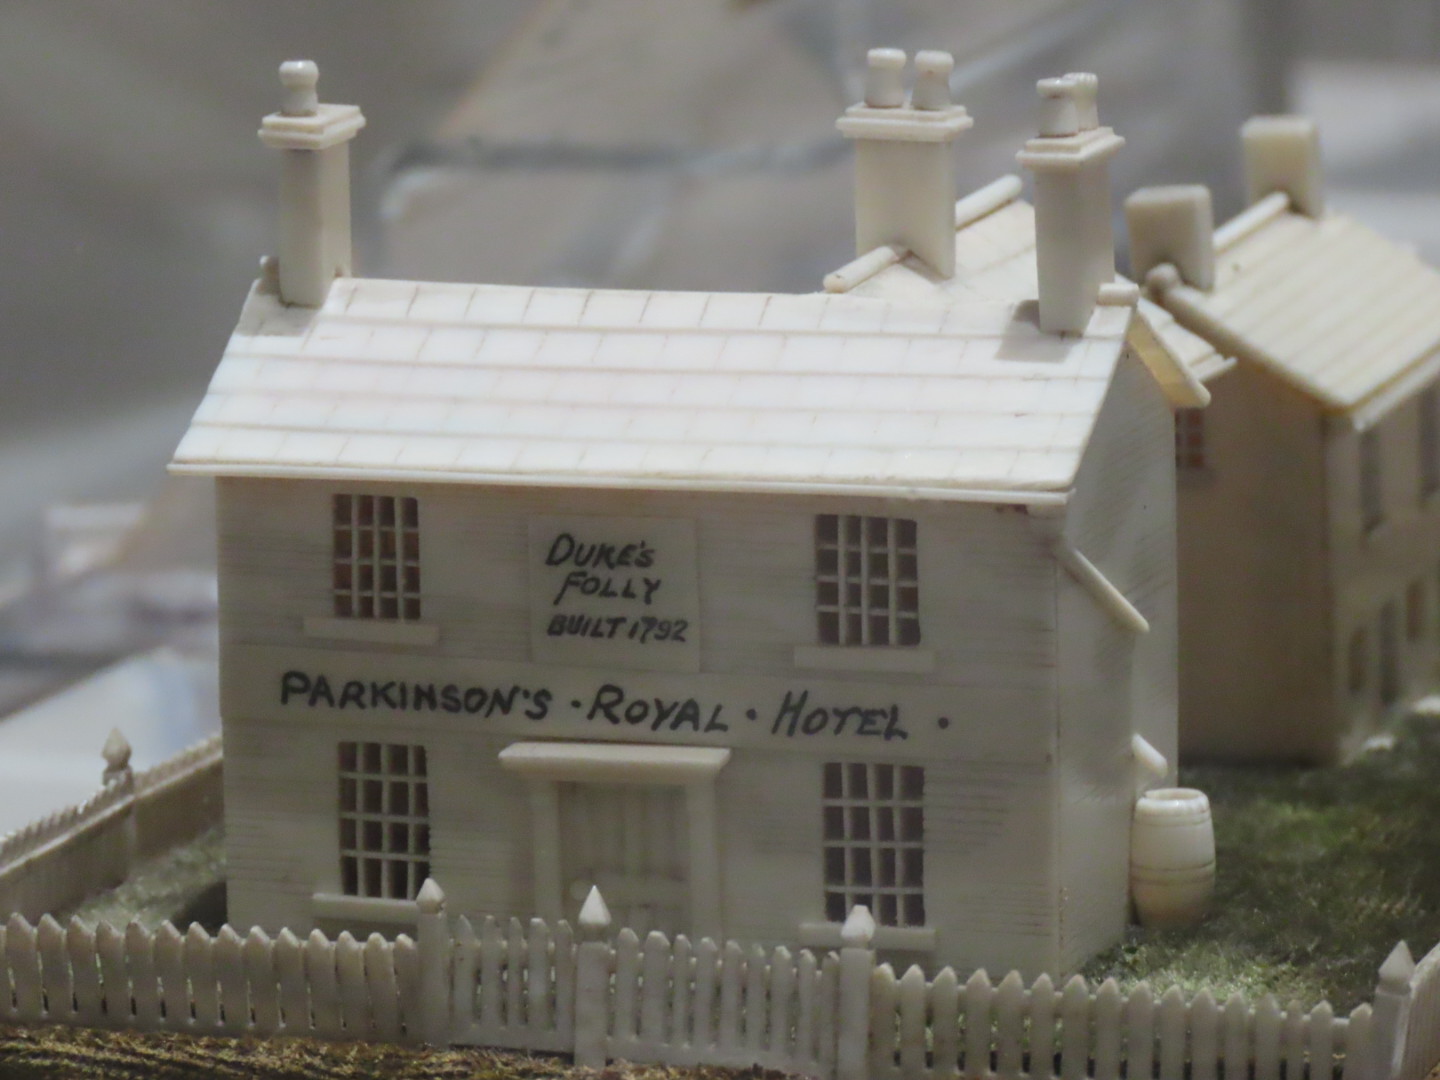 The exhibition Built on Sand 200 years of Southport's changing street scene is at The Atkinson on Lord Street in Southport from Saturday, June 18th 2022 to September 2022. A model of the original Dukes Folly Hotel